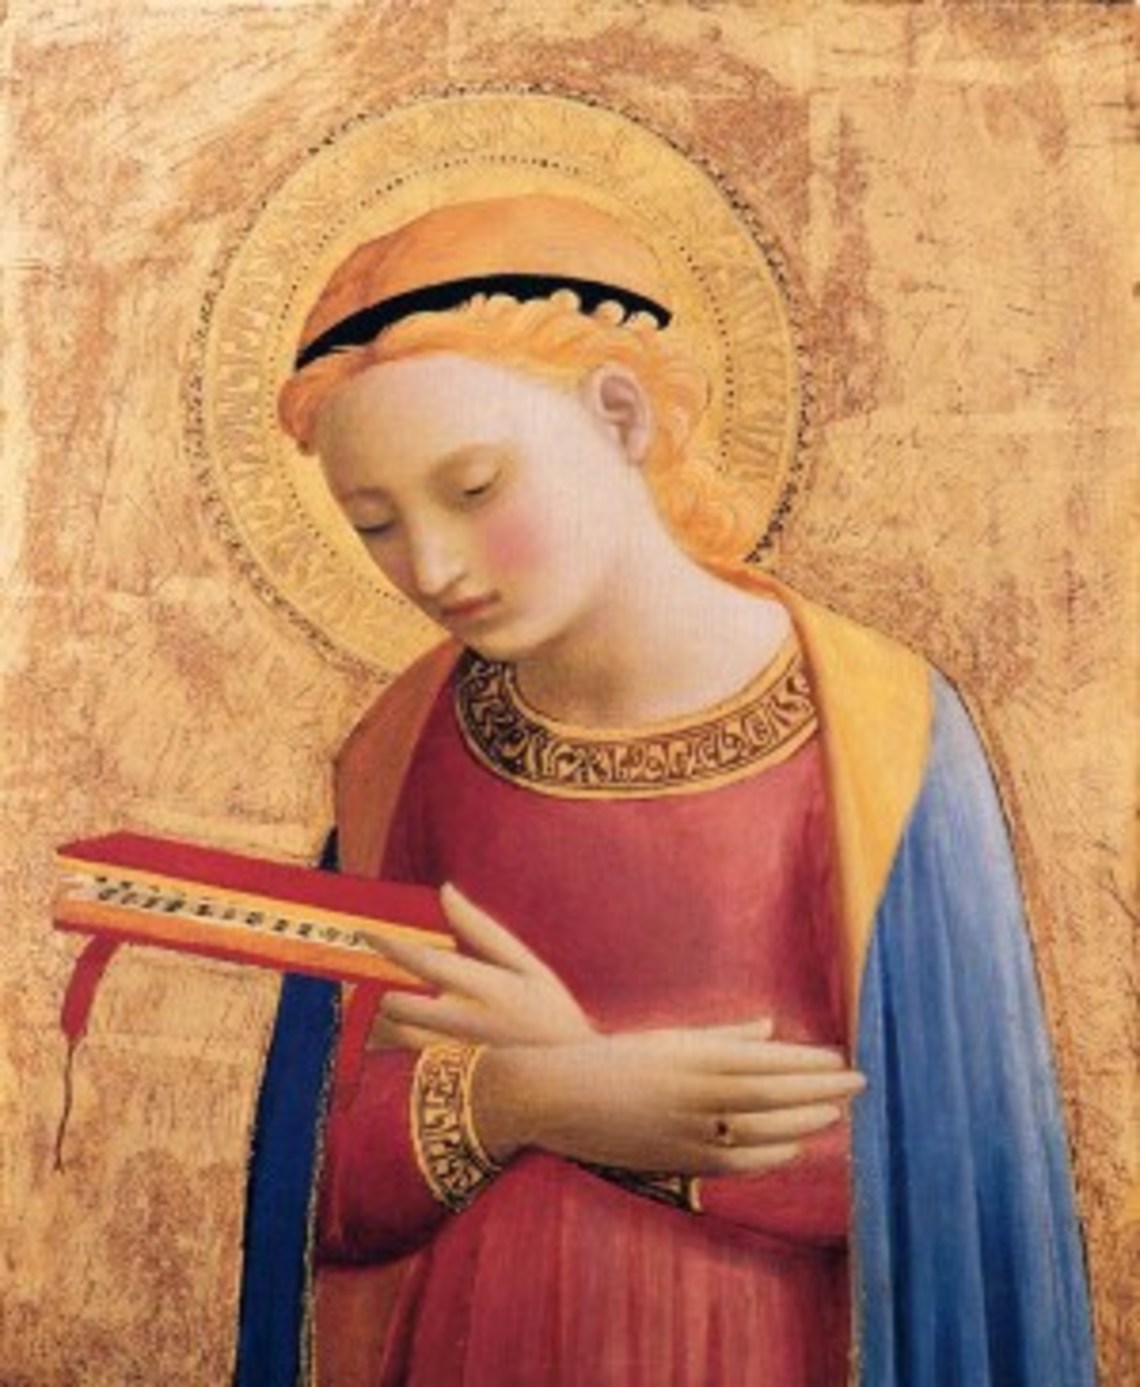 virgin-mary-annunciate-1433-fra-angelico-detroit-institute-of-arts-detroit-mi-usa